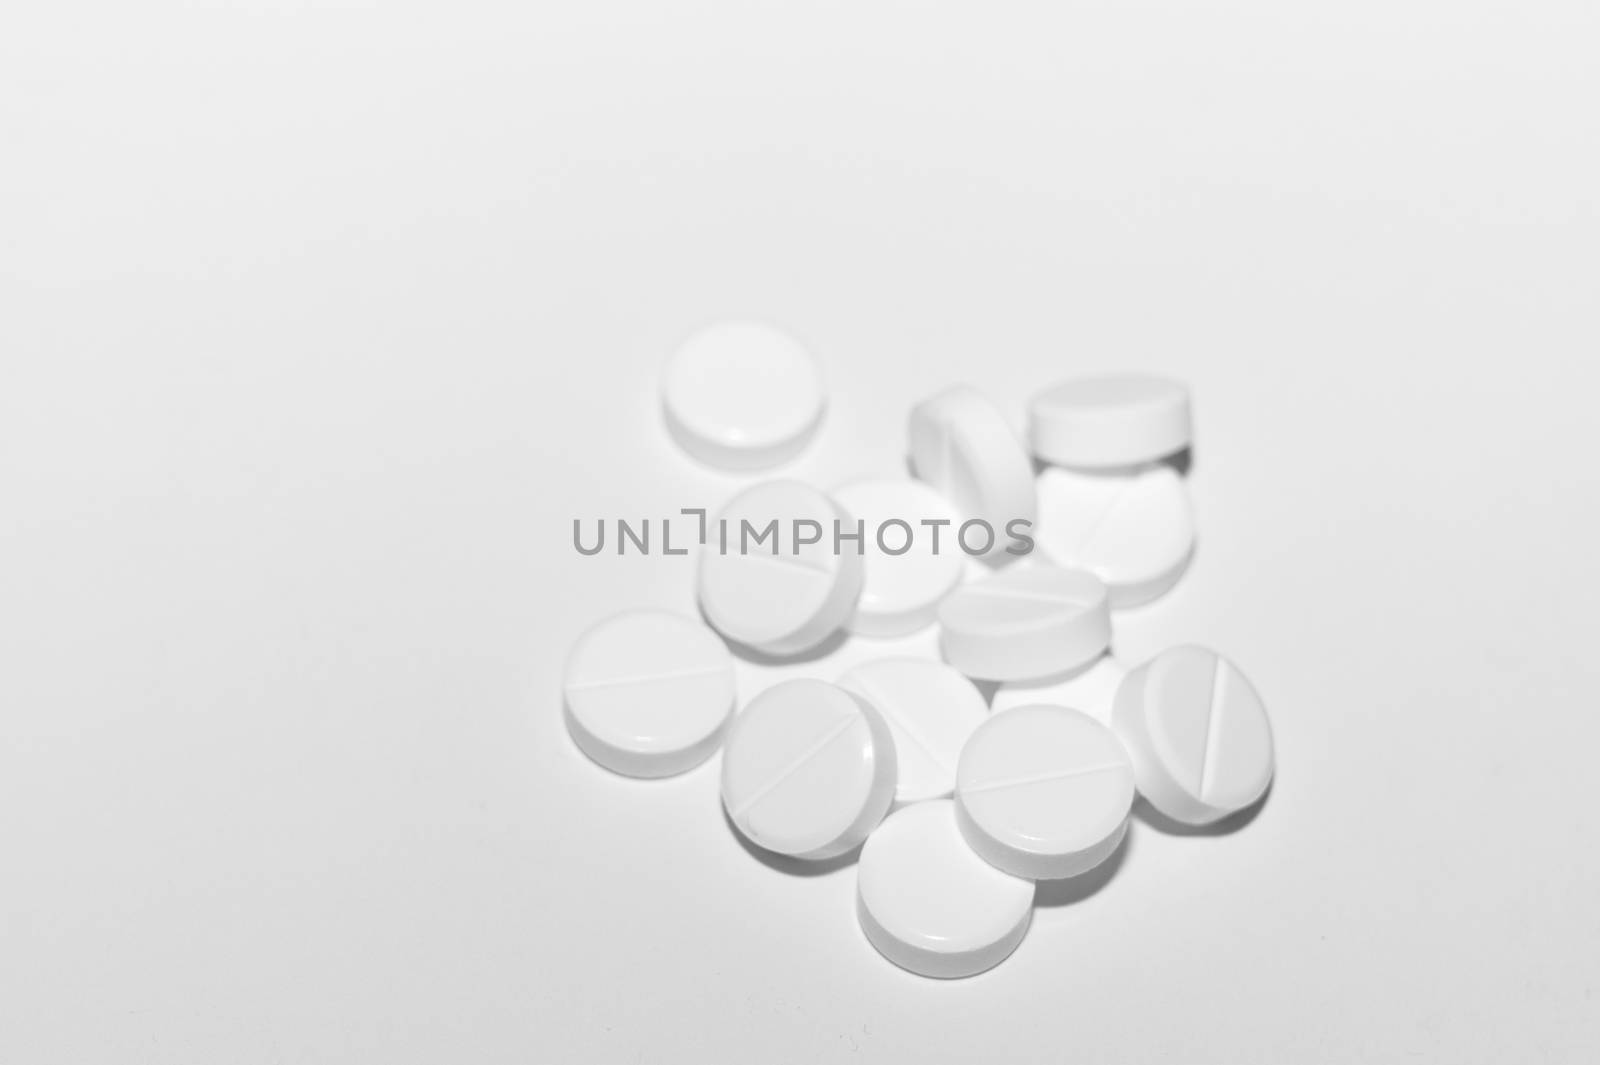 White pills on white background. Close-up view. Medical background. Healthcare image.